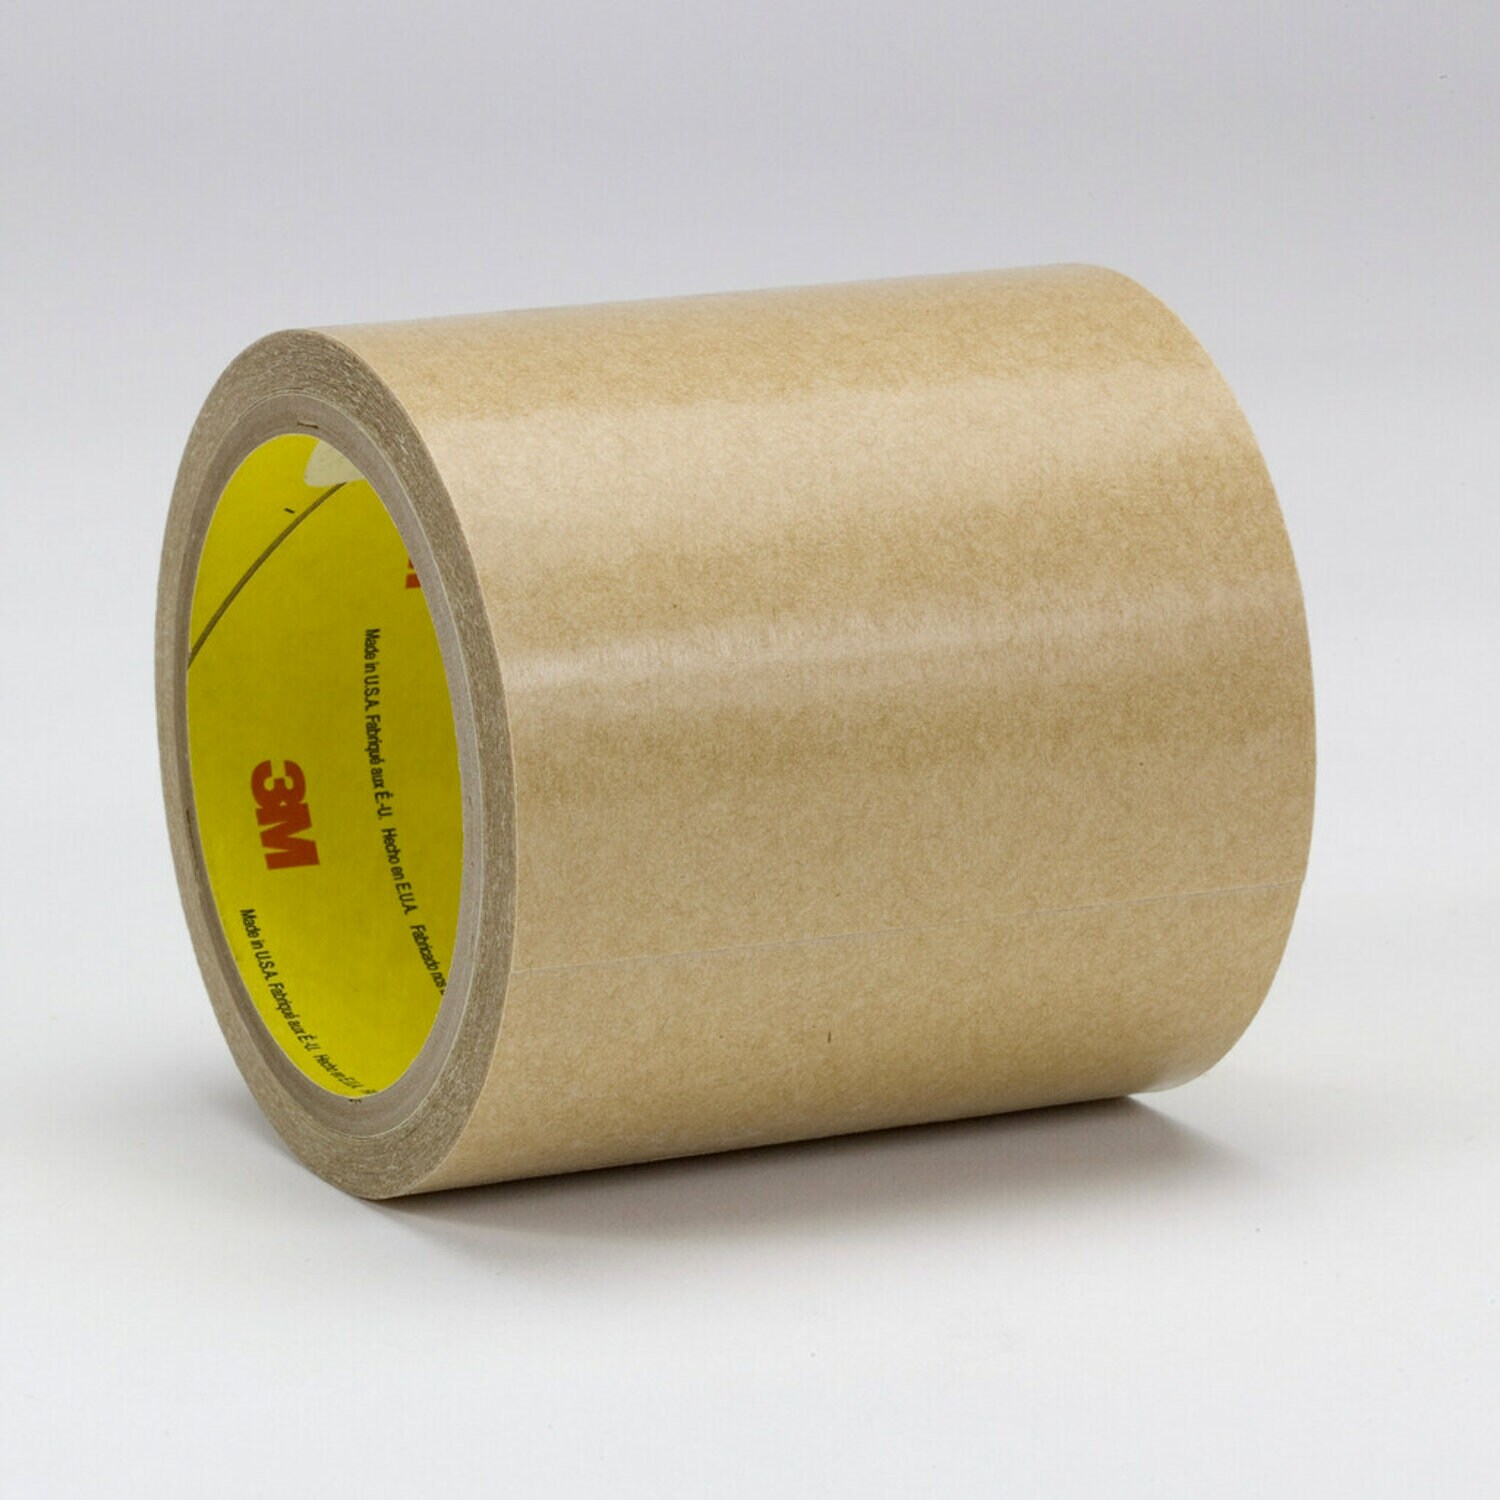 7000123748 - 3M Adhesive Transfer Tape 950, Clear, 12 in x 60 yd, 5 mil, 4 rolls per
case